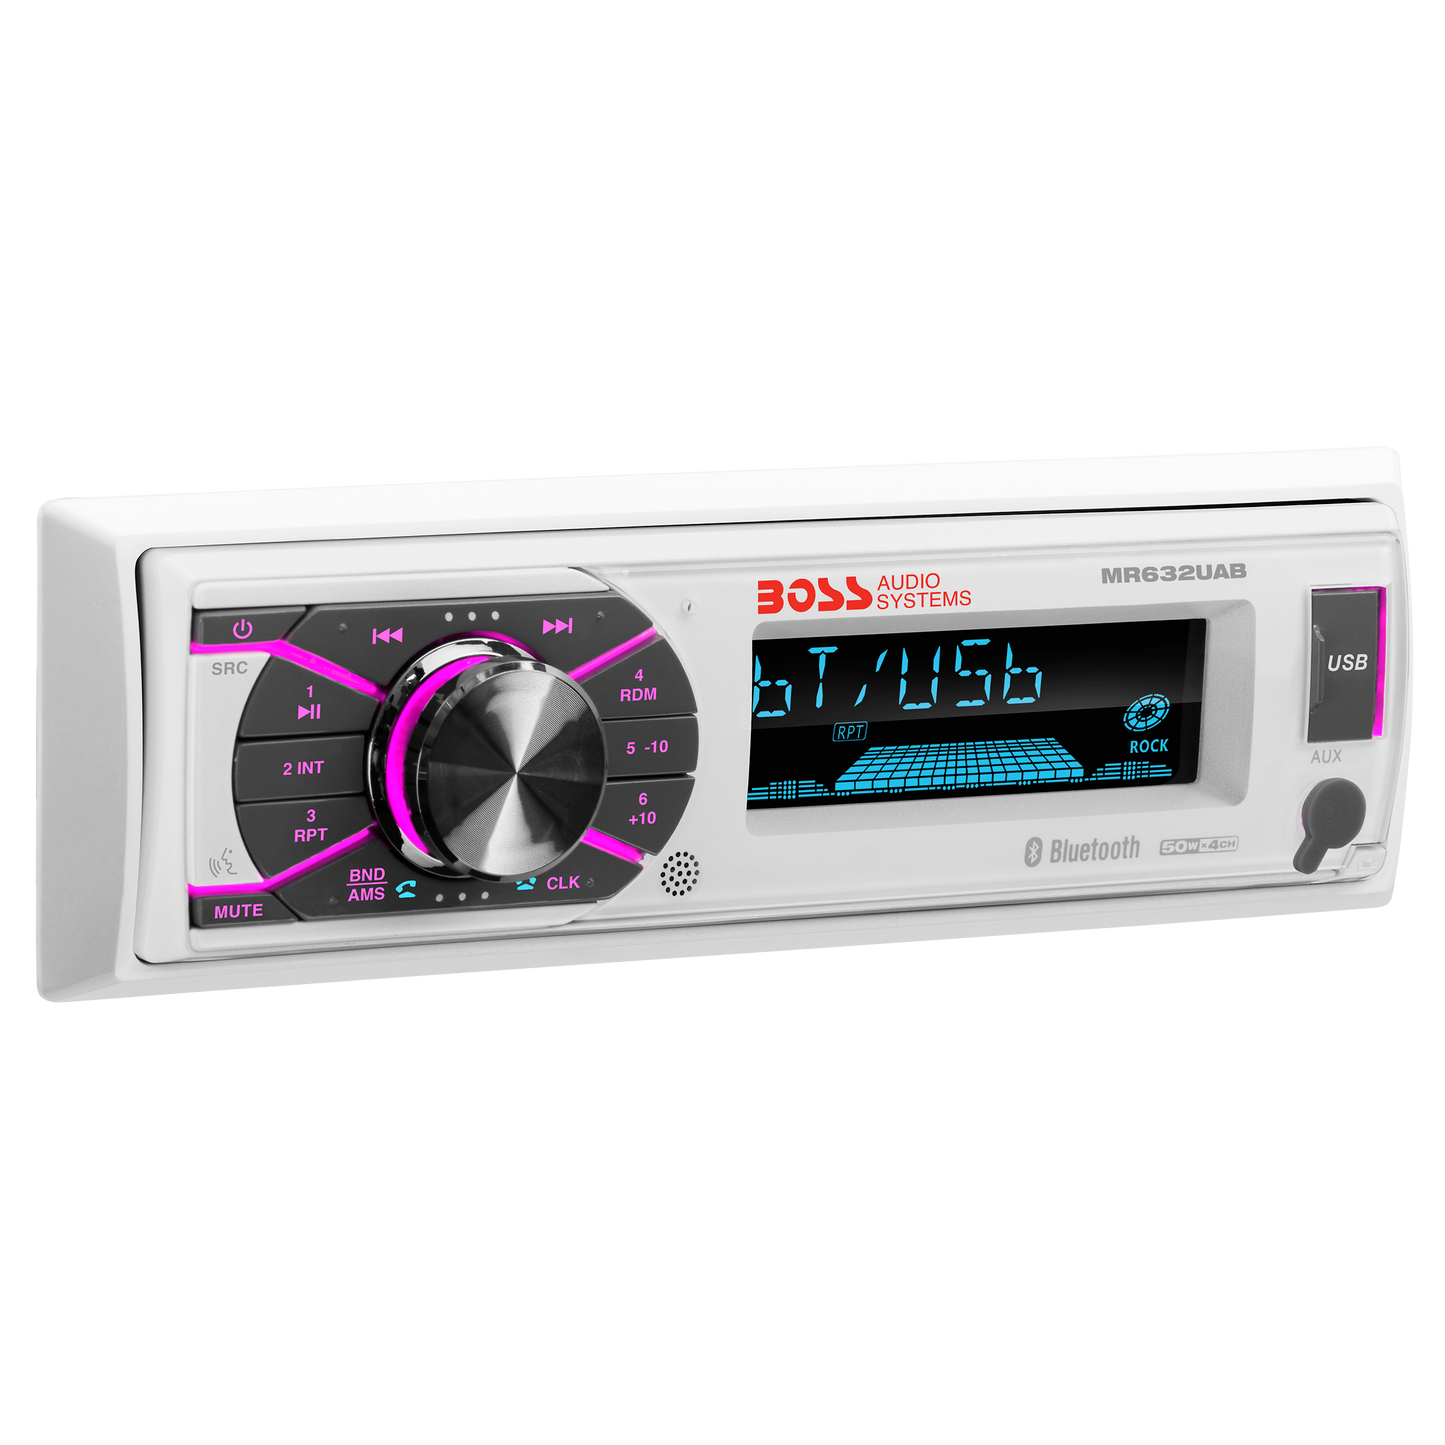 BOSS Audio Systems MR632UAB Marine Boat Stereo – Single Din